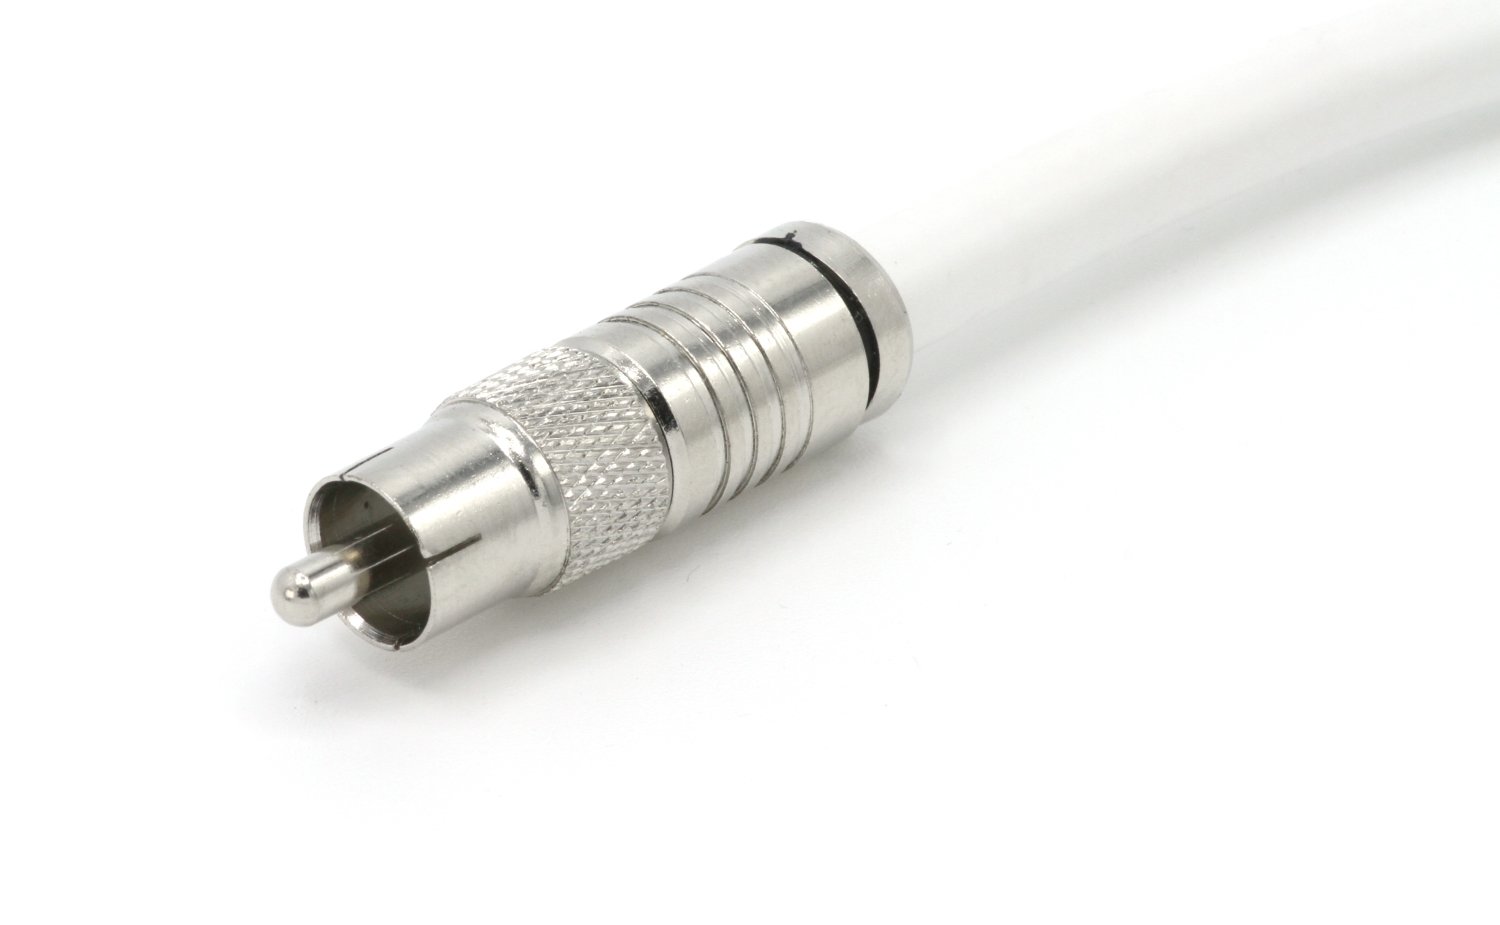 THE CIMPLE CO - White Digital Audio Coaxial Cable Subwoofer Cable - (S/PDIF) RCA Cable, 150 Feet - image 2 of 6